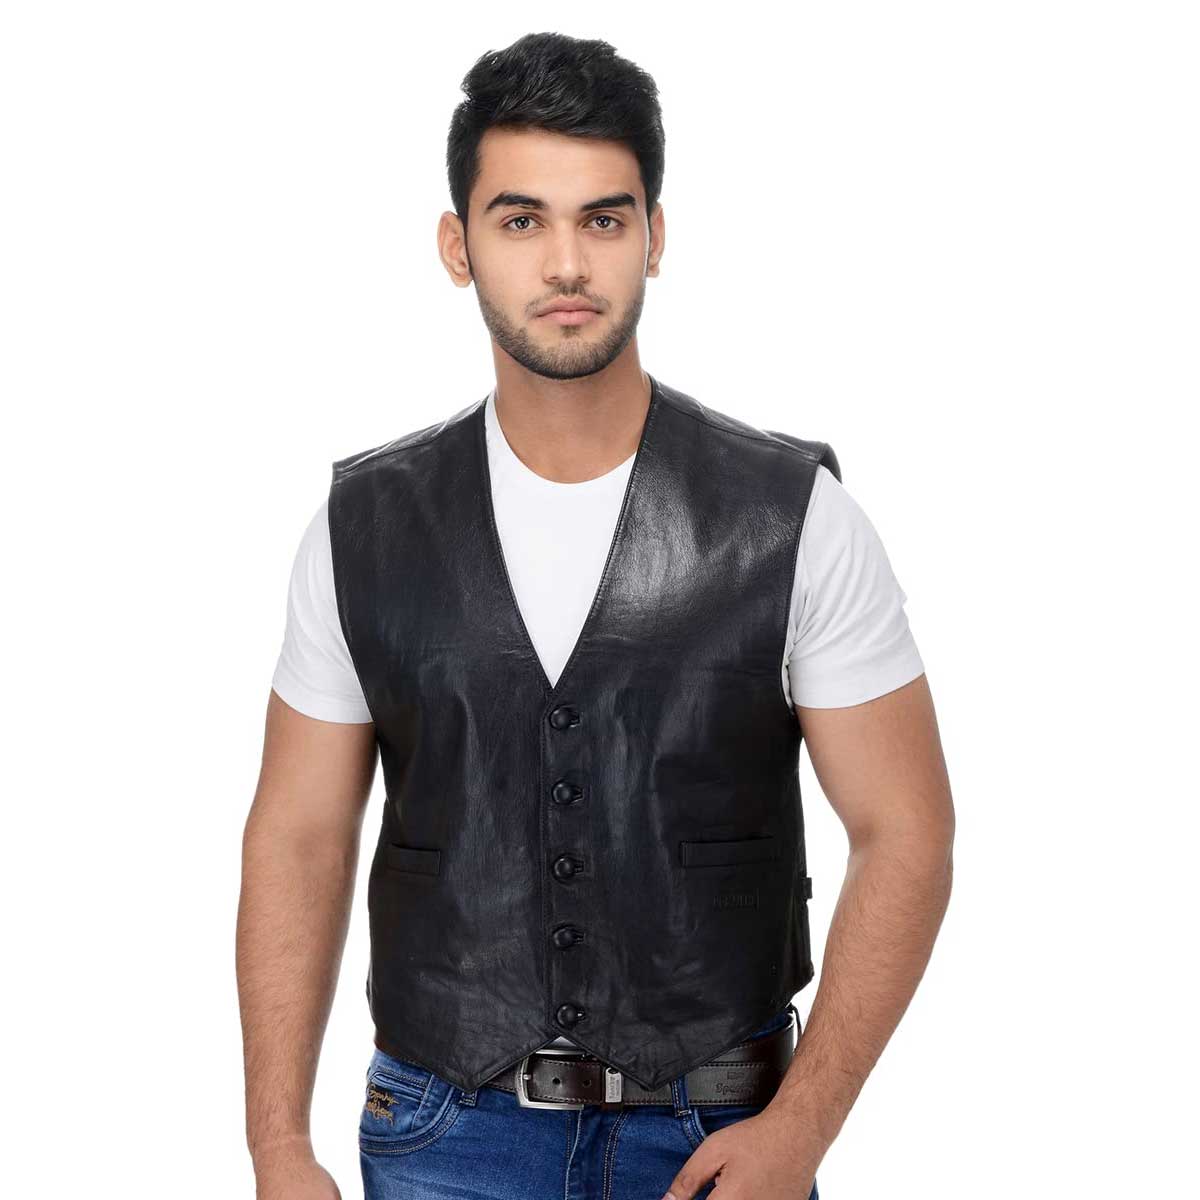 Leather Vest Manufacturers in Tambov